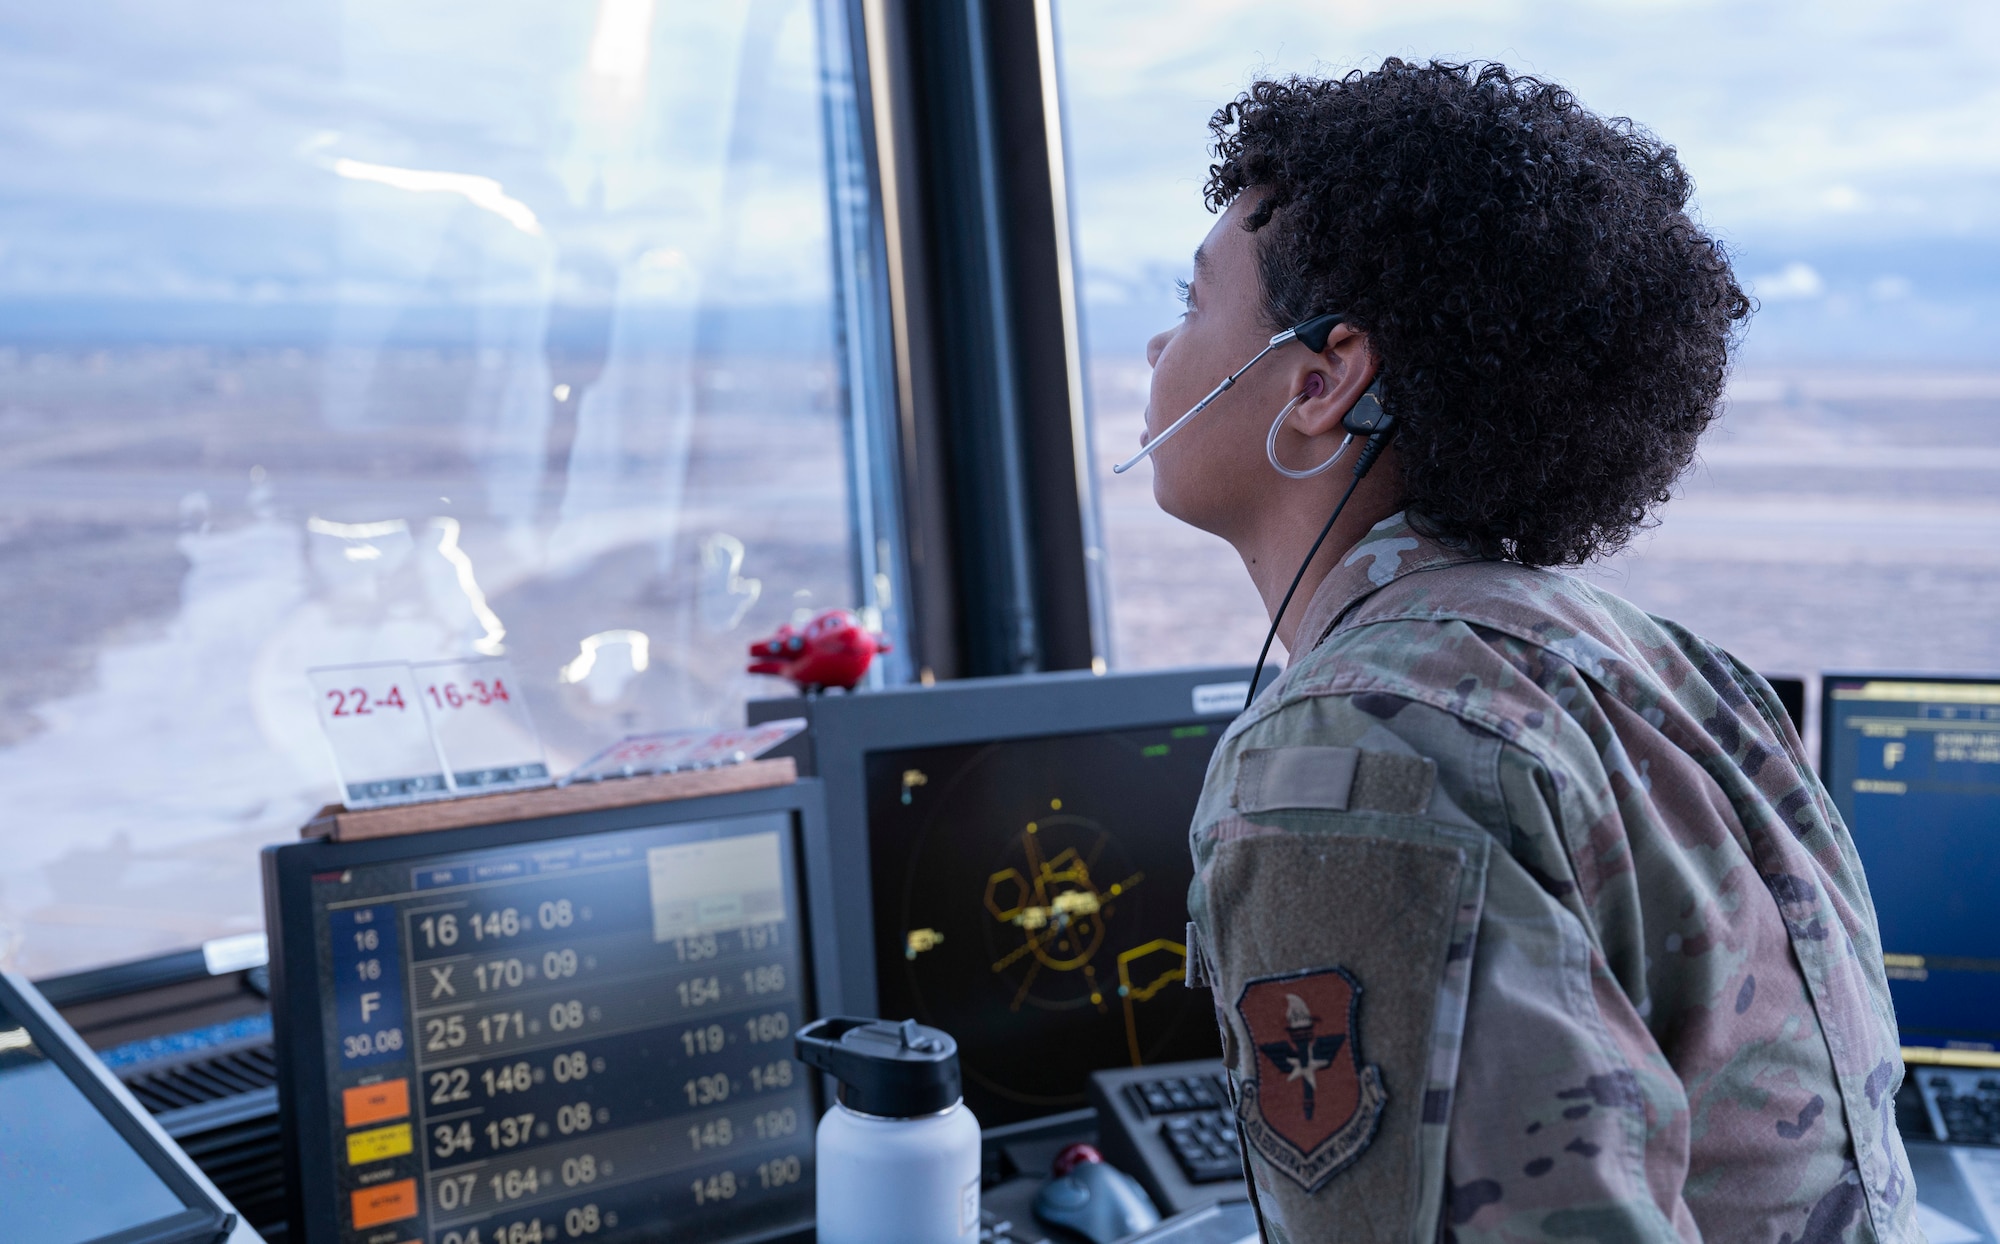 U.S. Air Force Airman 1st Class Alexis King, 54th Operations Support Squadron air traffic controller, monitors taxiway activity from the air traffic tower, at Holloman Air Force Base, New Mexico, Jan. 24, 2024. ATC Airmen play a significant role in communicating fight patterns, weather information and are responsible for clearing pilots during take-off and landing. (U.S. Air Force photo by Airman 1st Class Michelle Ferrari)